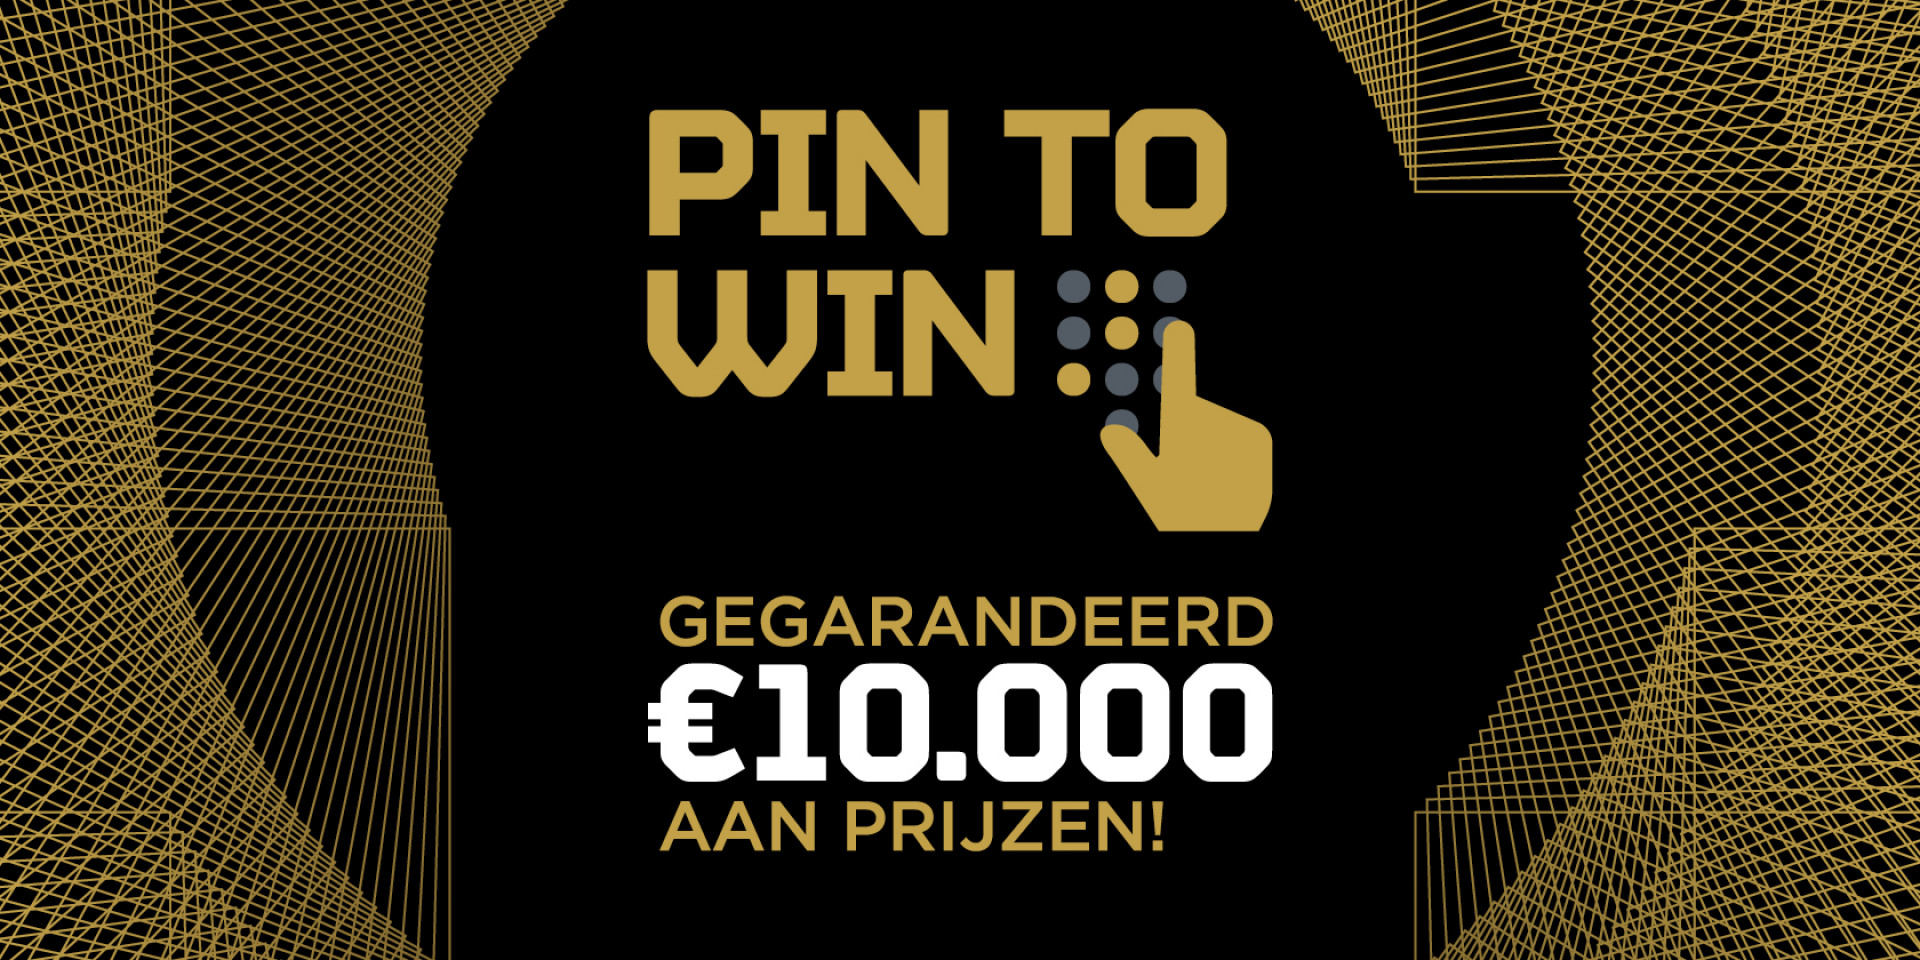 Pin to Win in Asten